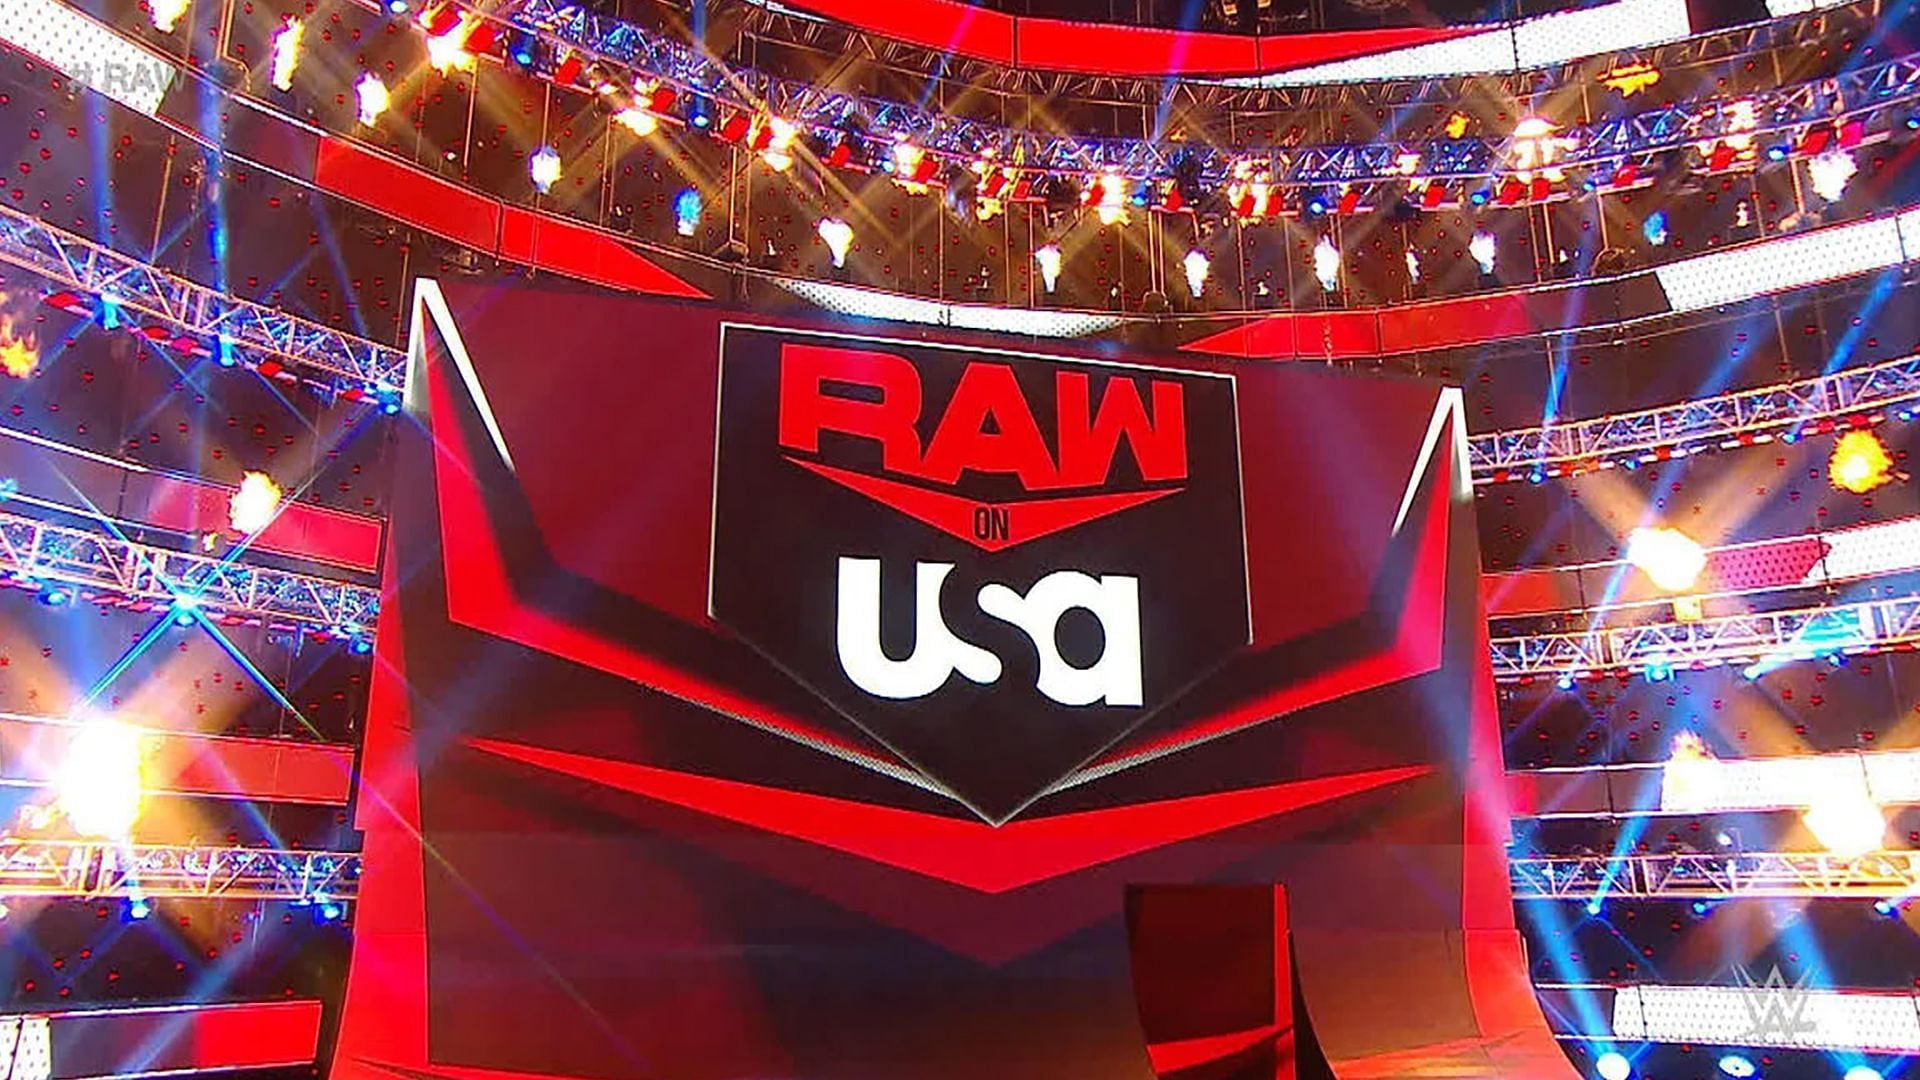 The logos for WWE RAW and the USA Network on display